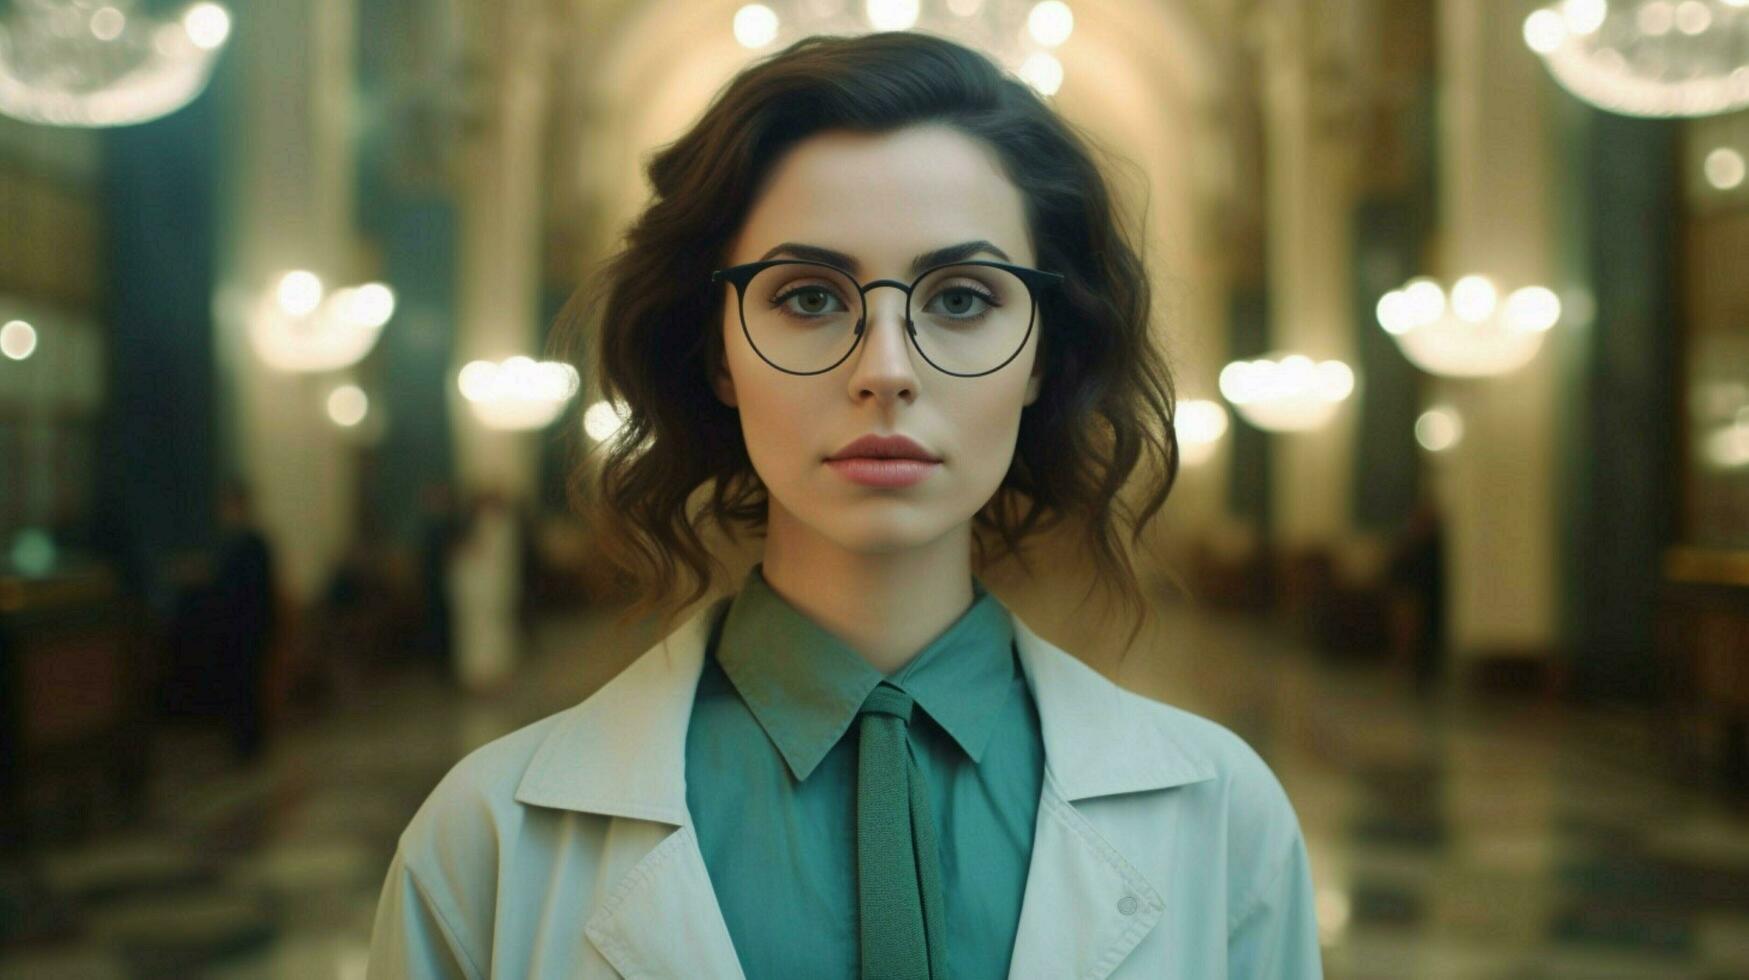 a woman wearing glasses that sayim a doctor photo